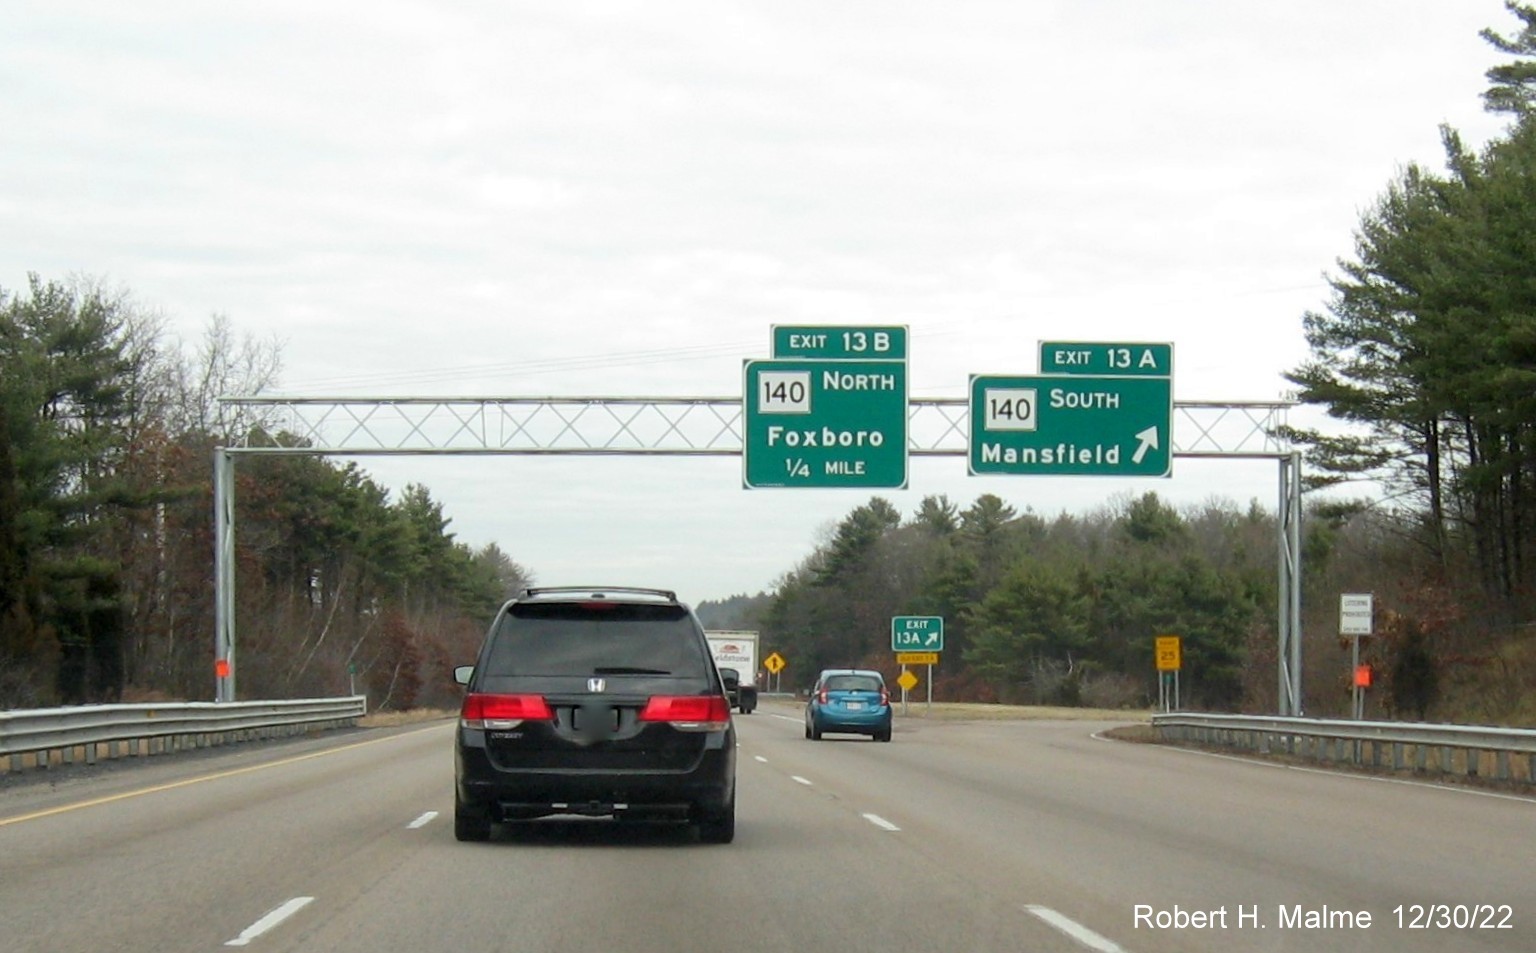 Image of recently placed gore sign for MA 140 South exit on I-95 North in Foxborough, December 2022